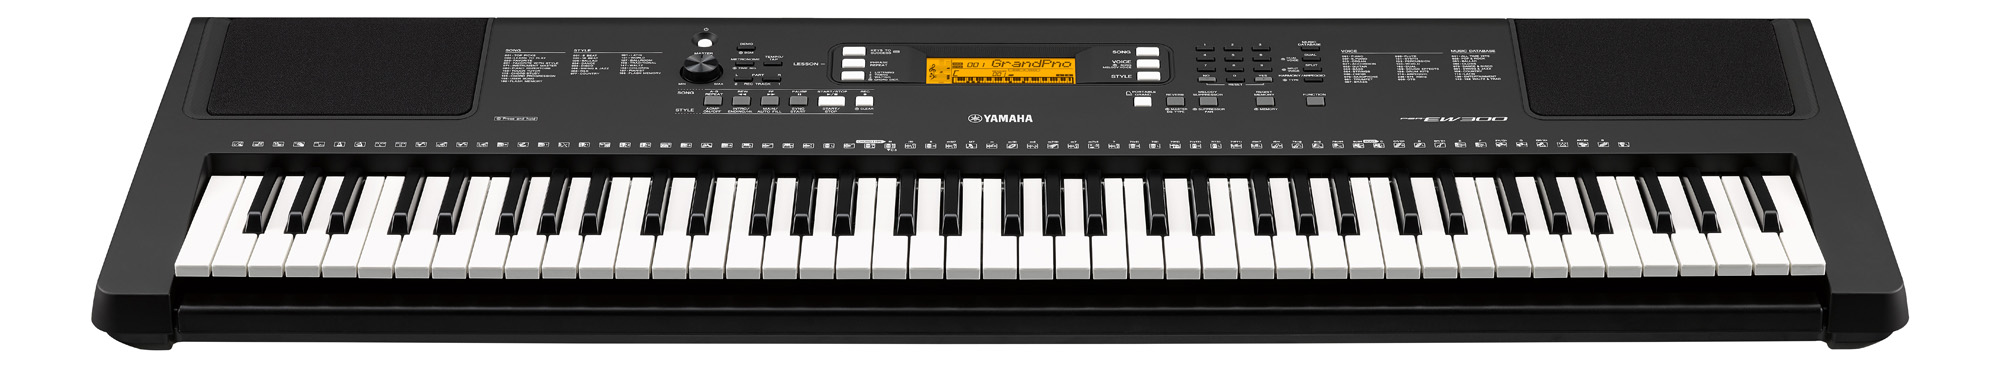 how to connect yamaha keyboard to mac